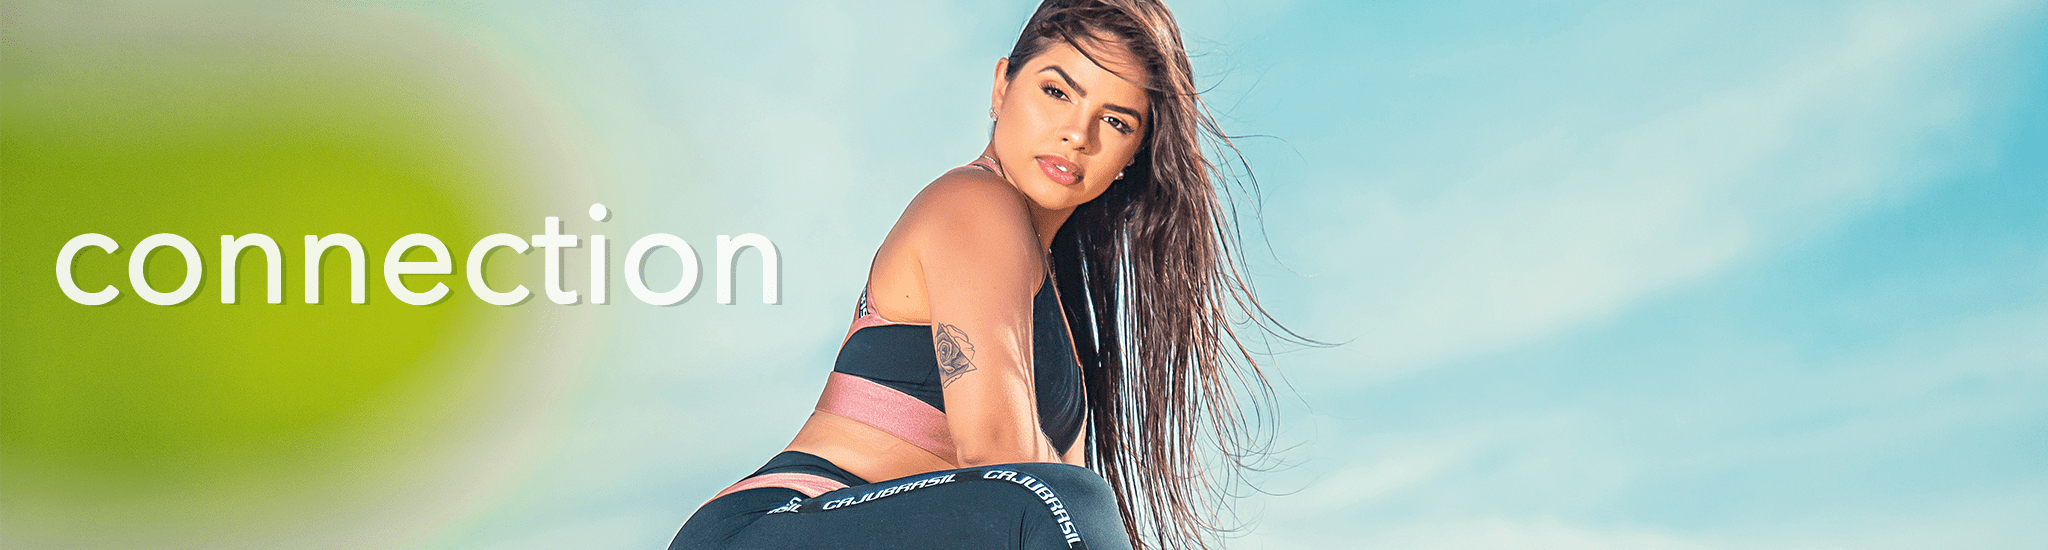 GoFitBoss – Connection Collection by CajuBrasil